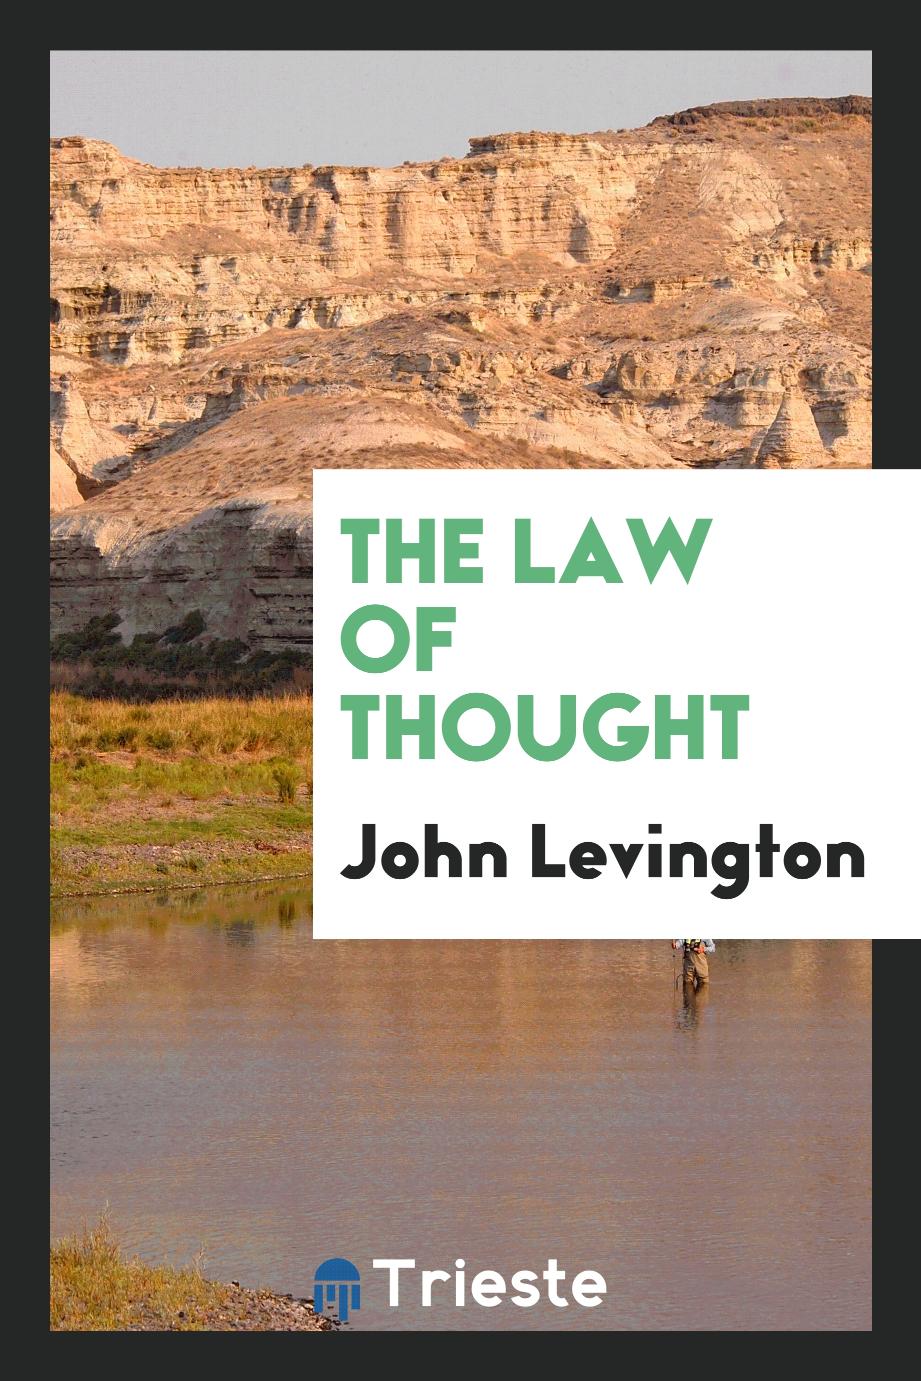 The Law of Thought